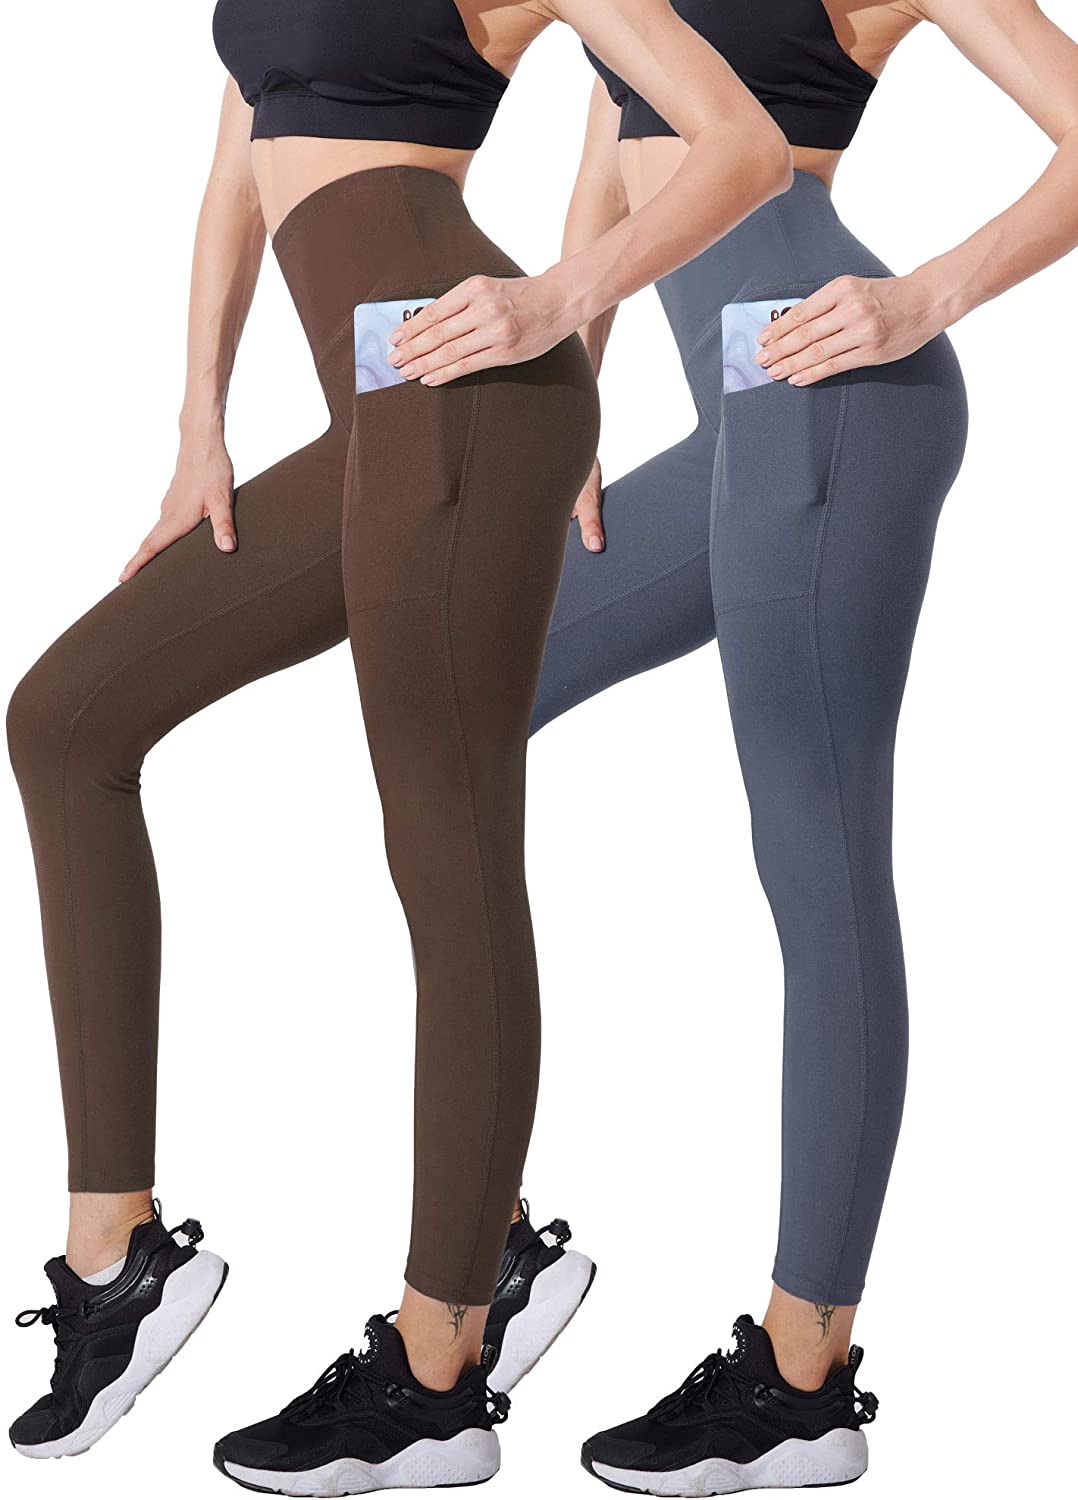 Tummy Control Yoga Pants with Pockets,2 or 3 Pack CADMUS High Waisted Workout Leggings for Women 